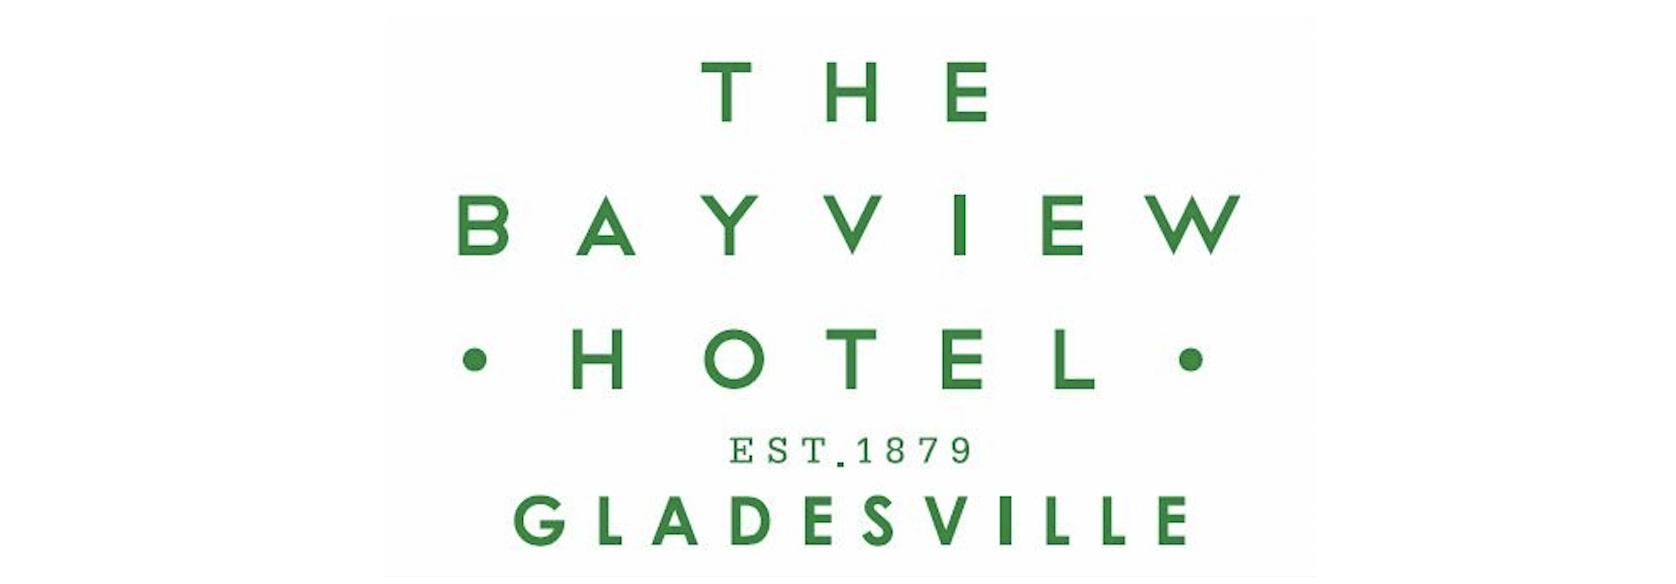 THE BAYVIEW HOTEL